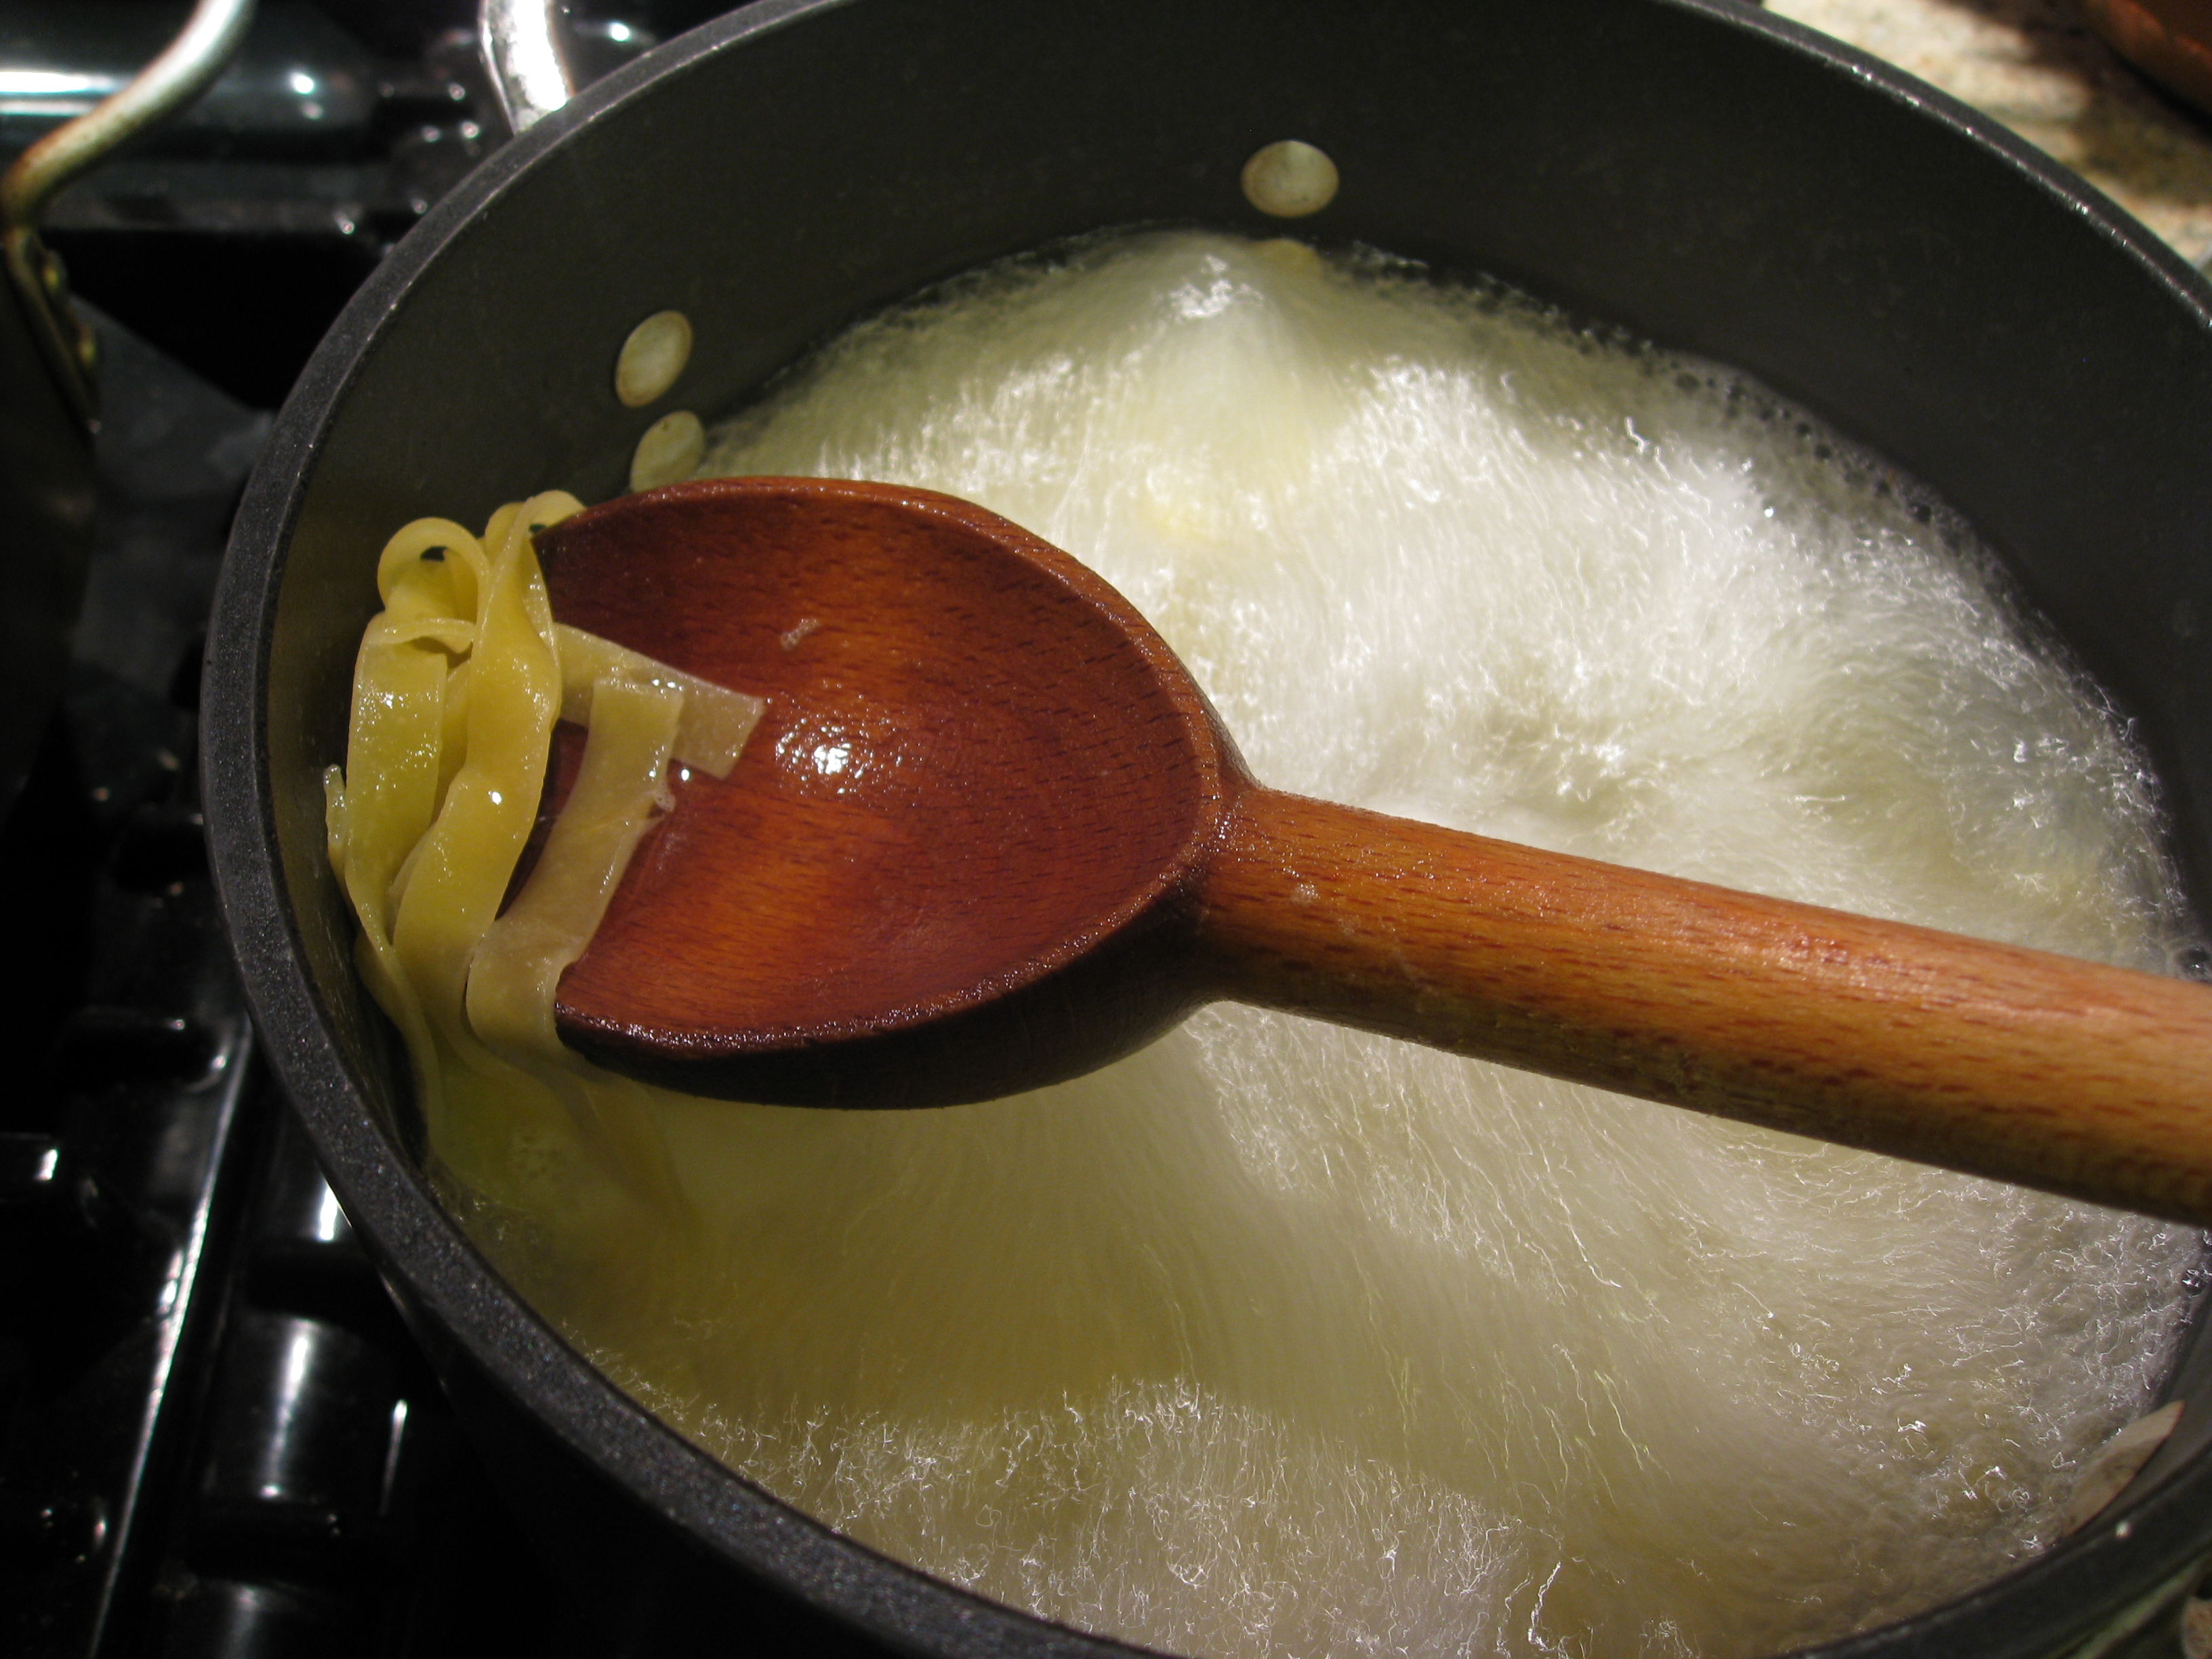 Meanwhile, boil water and add egg noodles for about 4 minutes until al dente. 